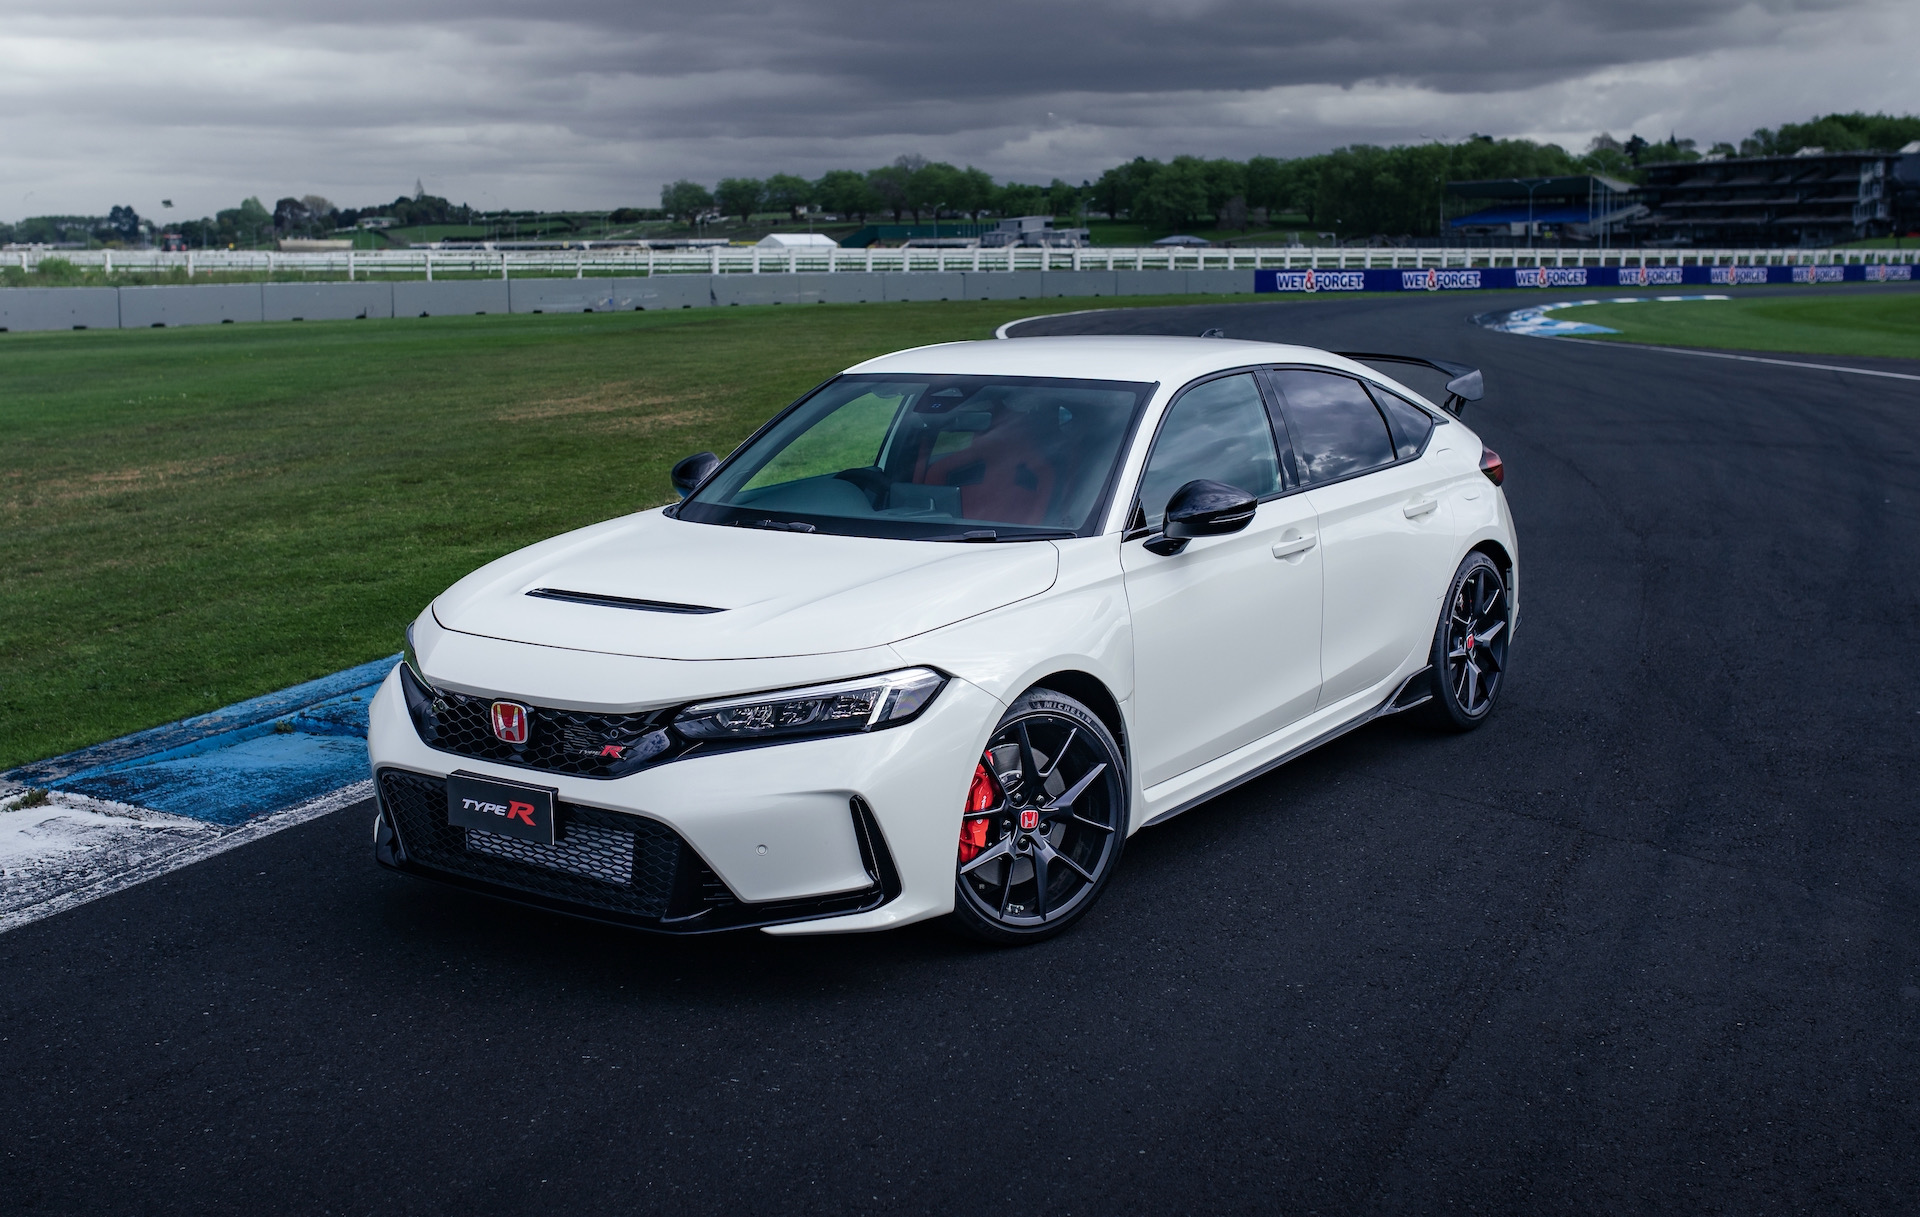 2023 Honda Civic Type R on sale in Australia from 72,600